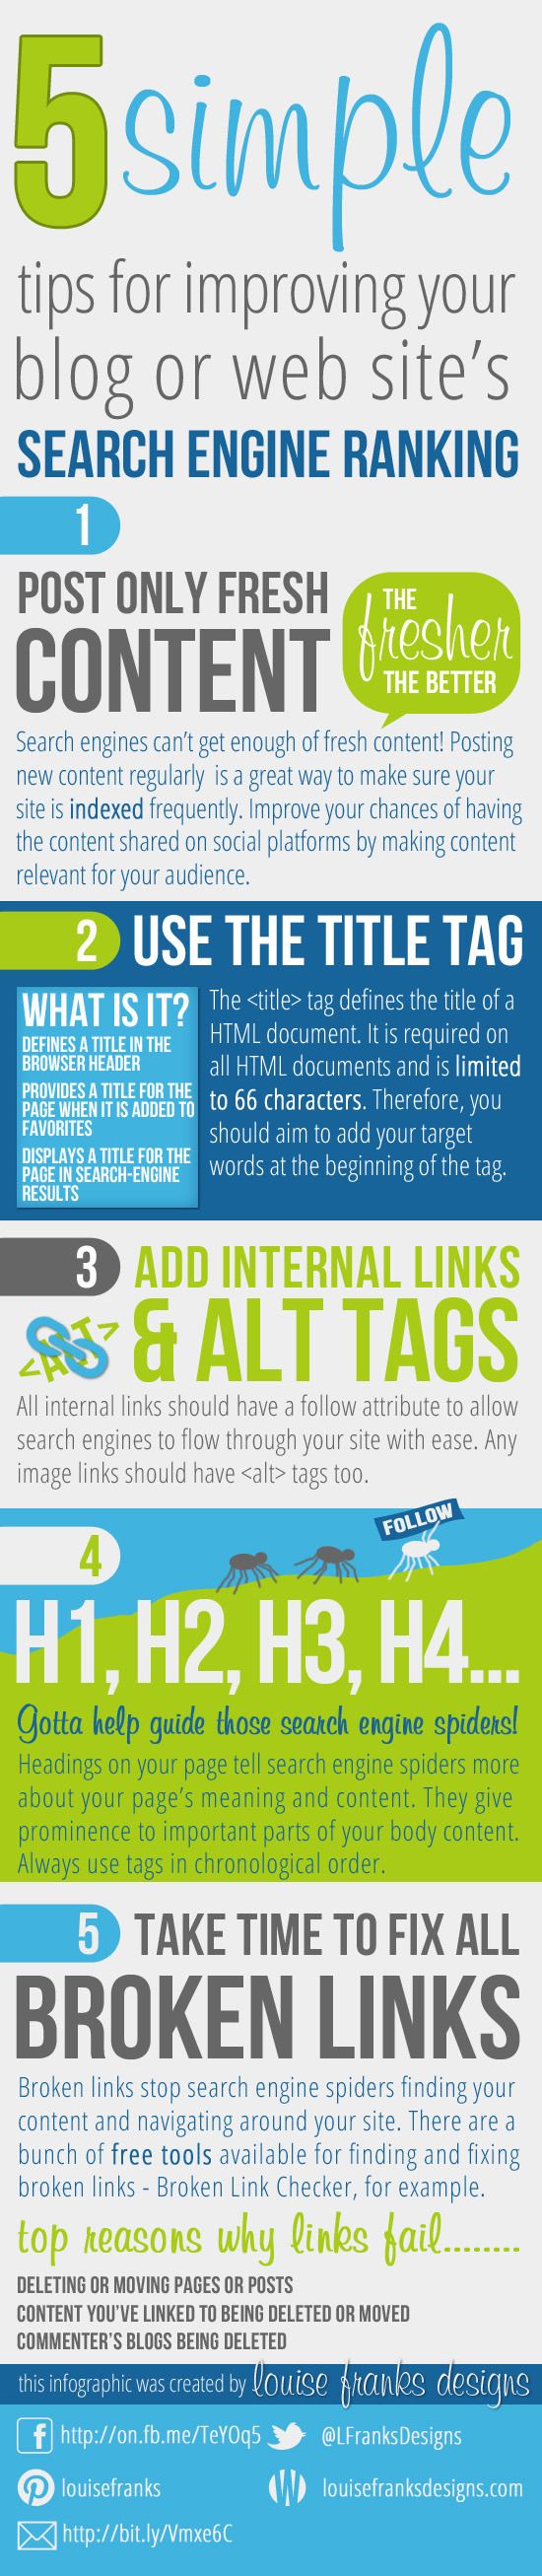 Tips to Improve Your Money Site [Infographic]